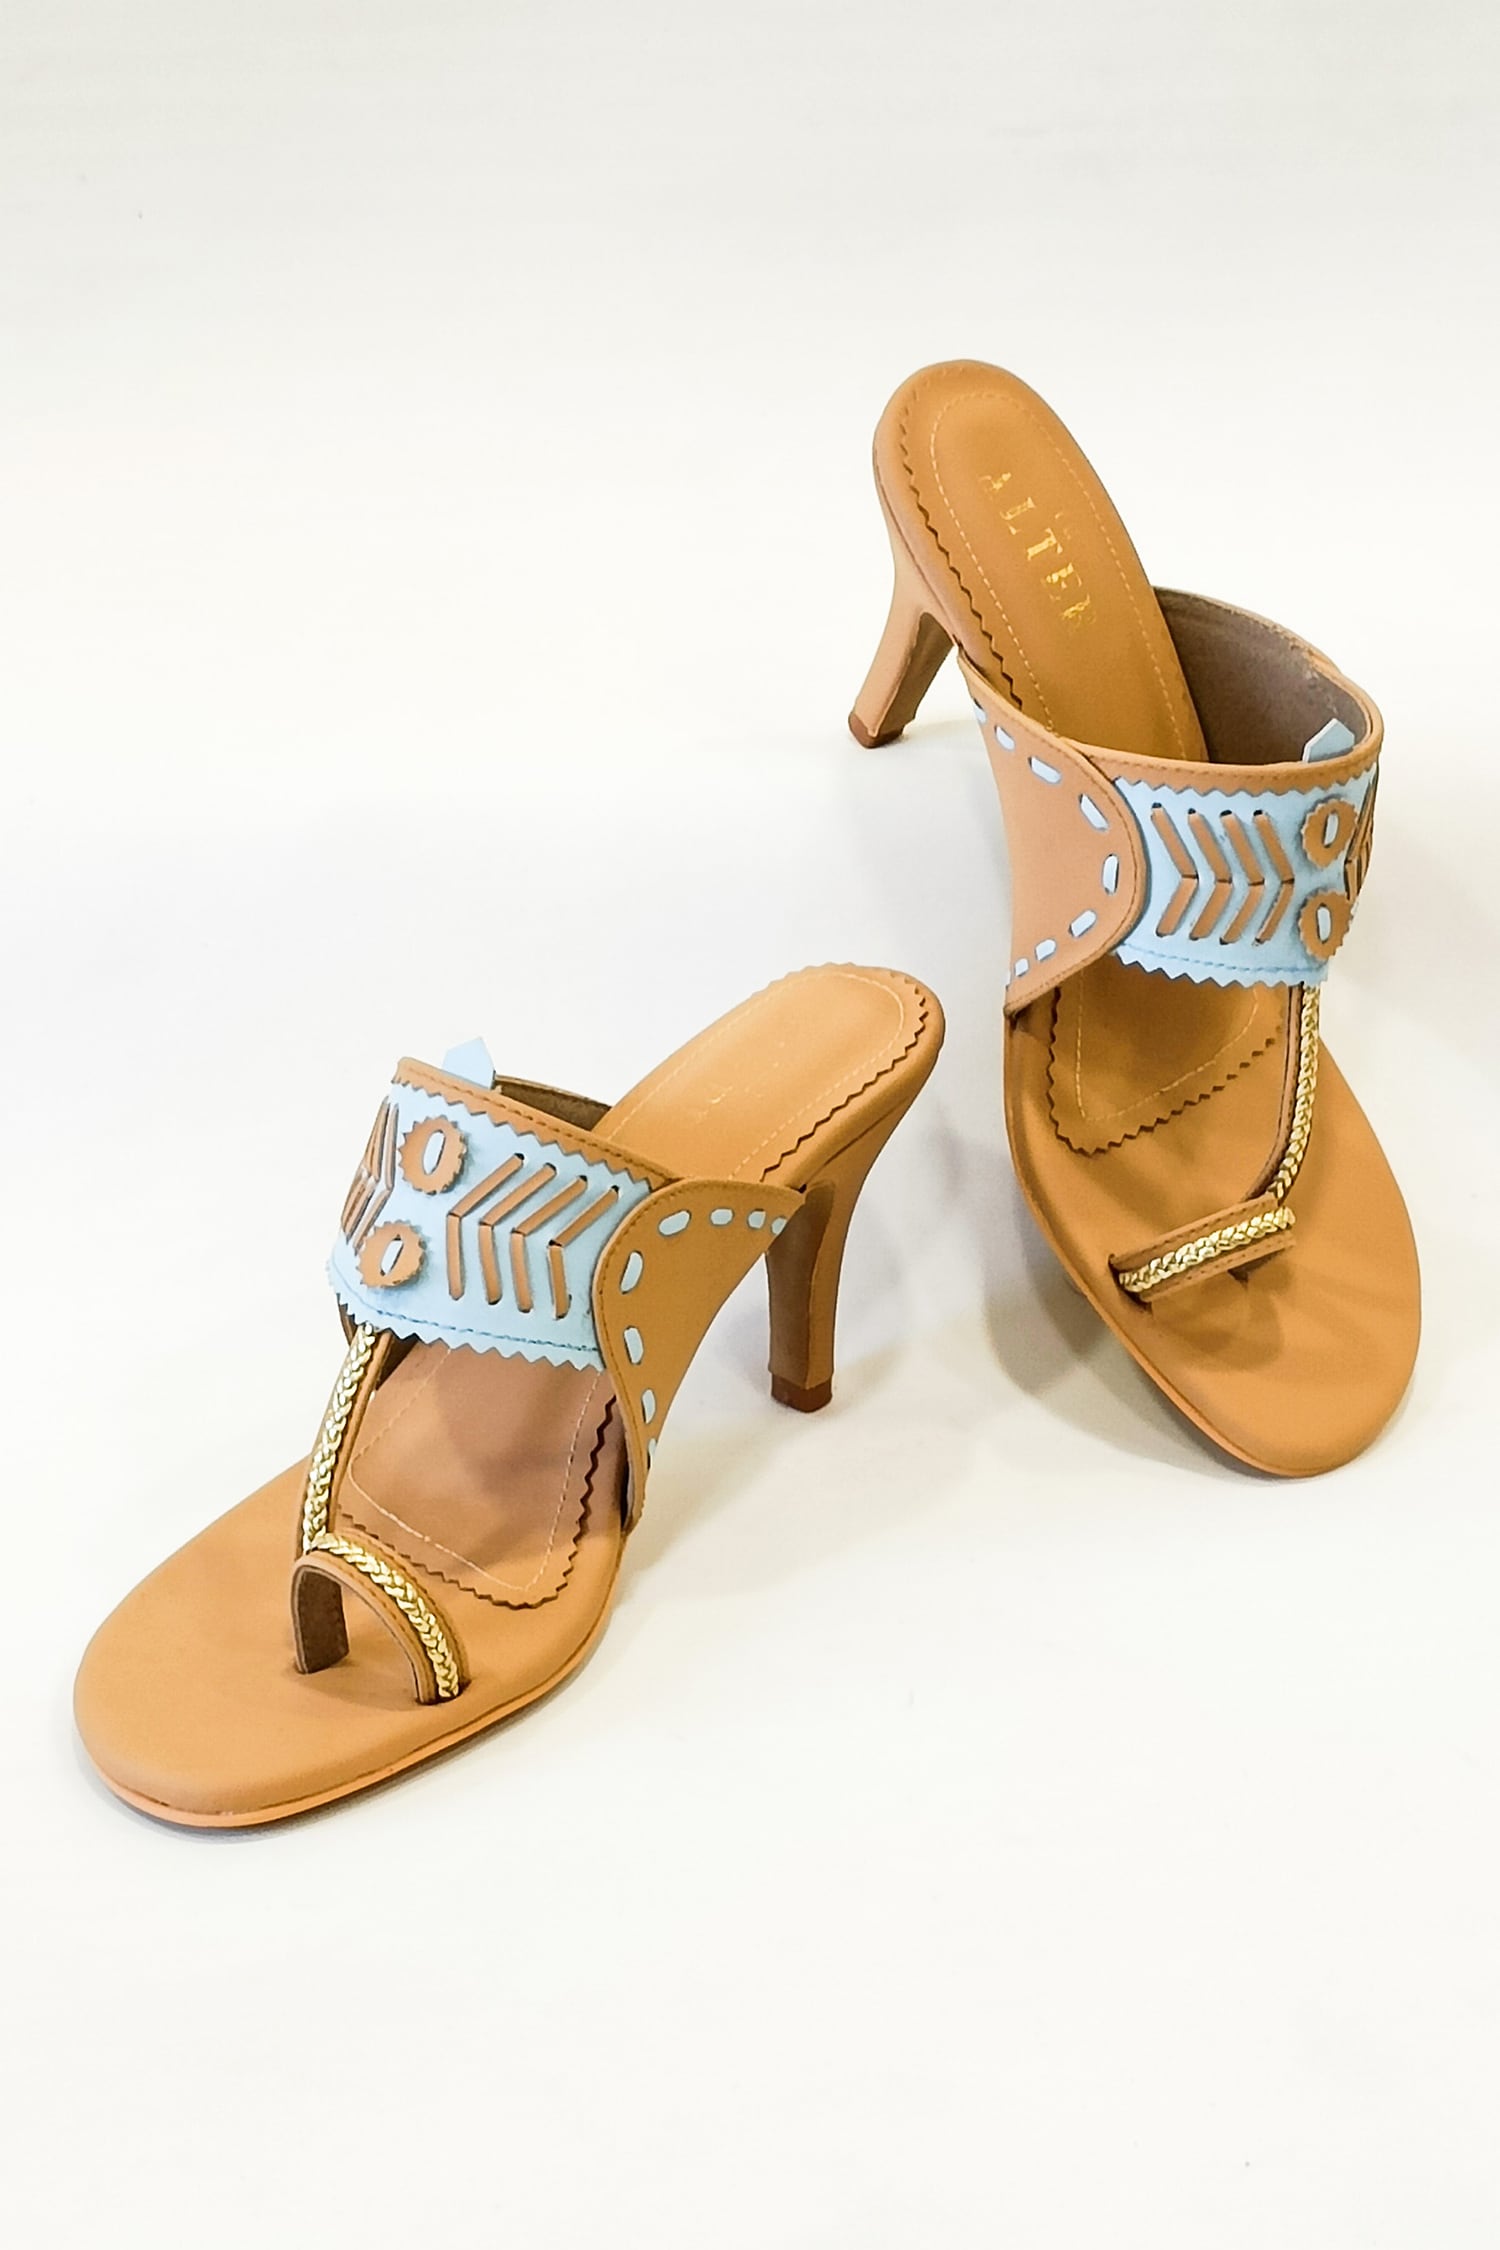 Kolhapuri Sandals for Ladies: Tradition and Style Combined | by Coralhaze |  Medium